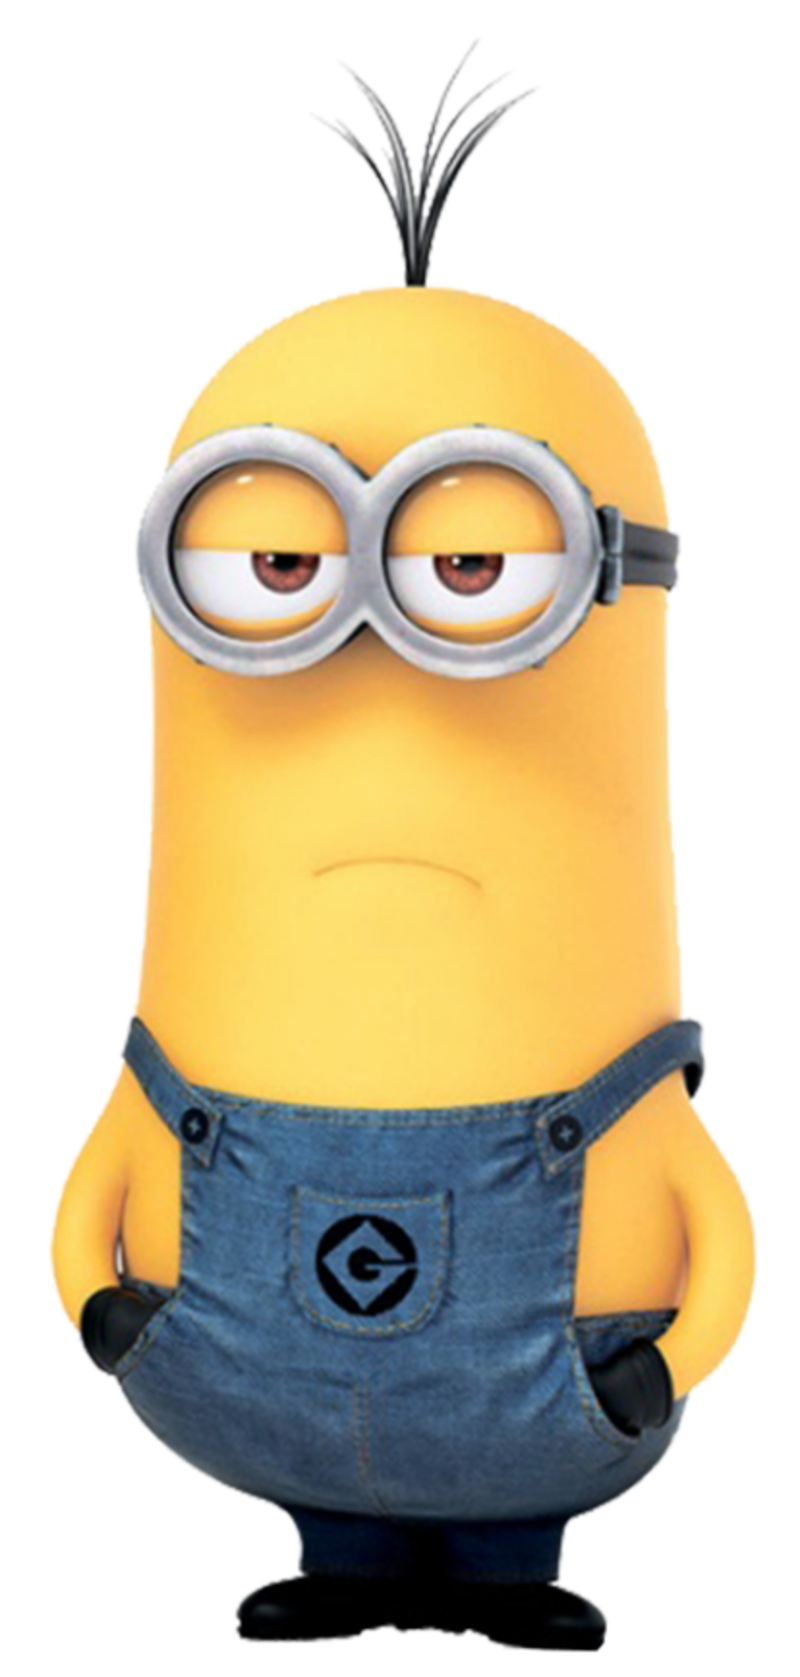 Minion clipart kevin, Minion kevin Transparent FREE for download on ...